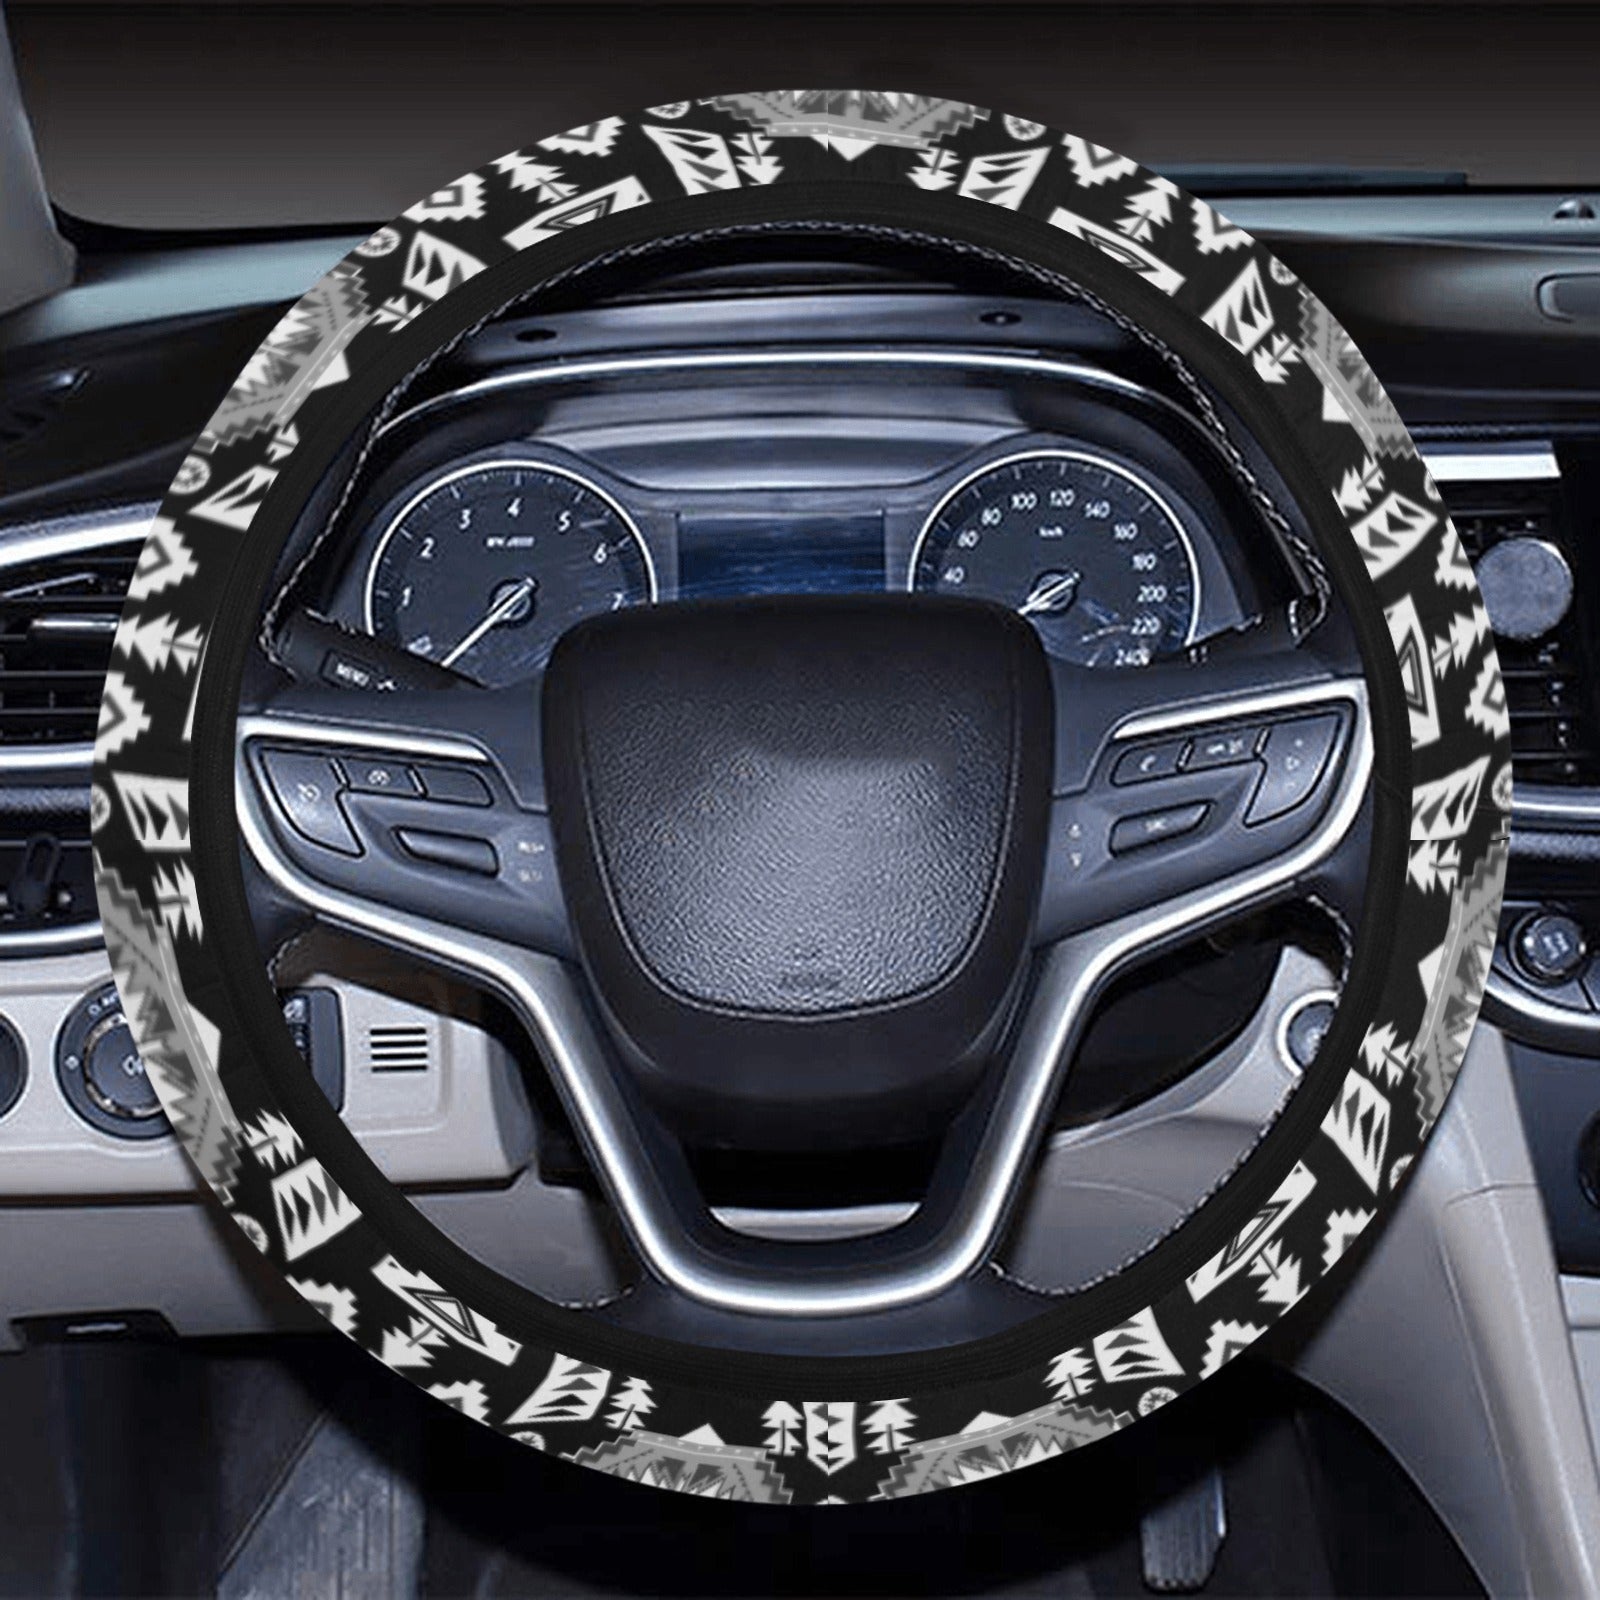 Chiefs Mountain Black and White Steering Wheel Cover with Elastic Edge